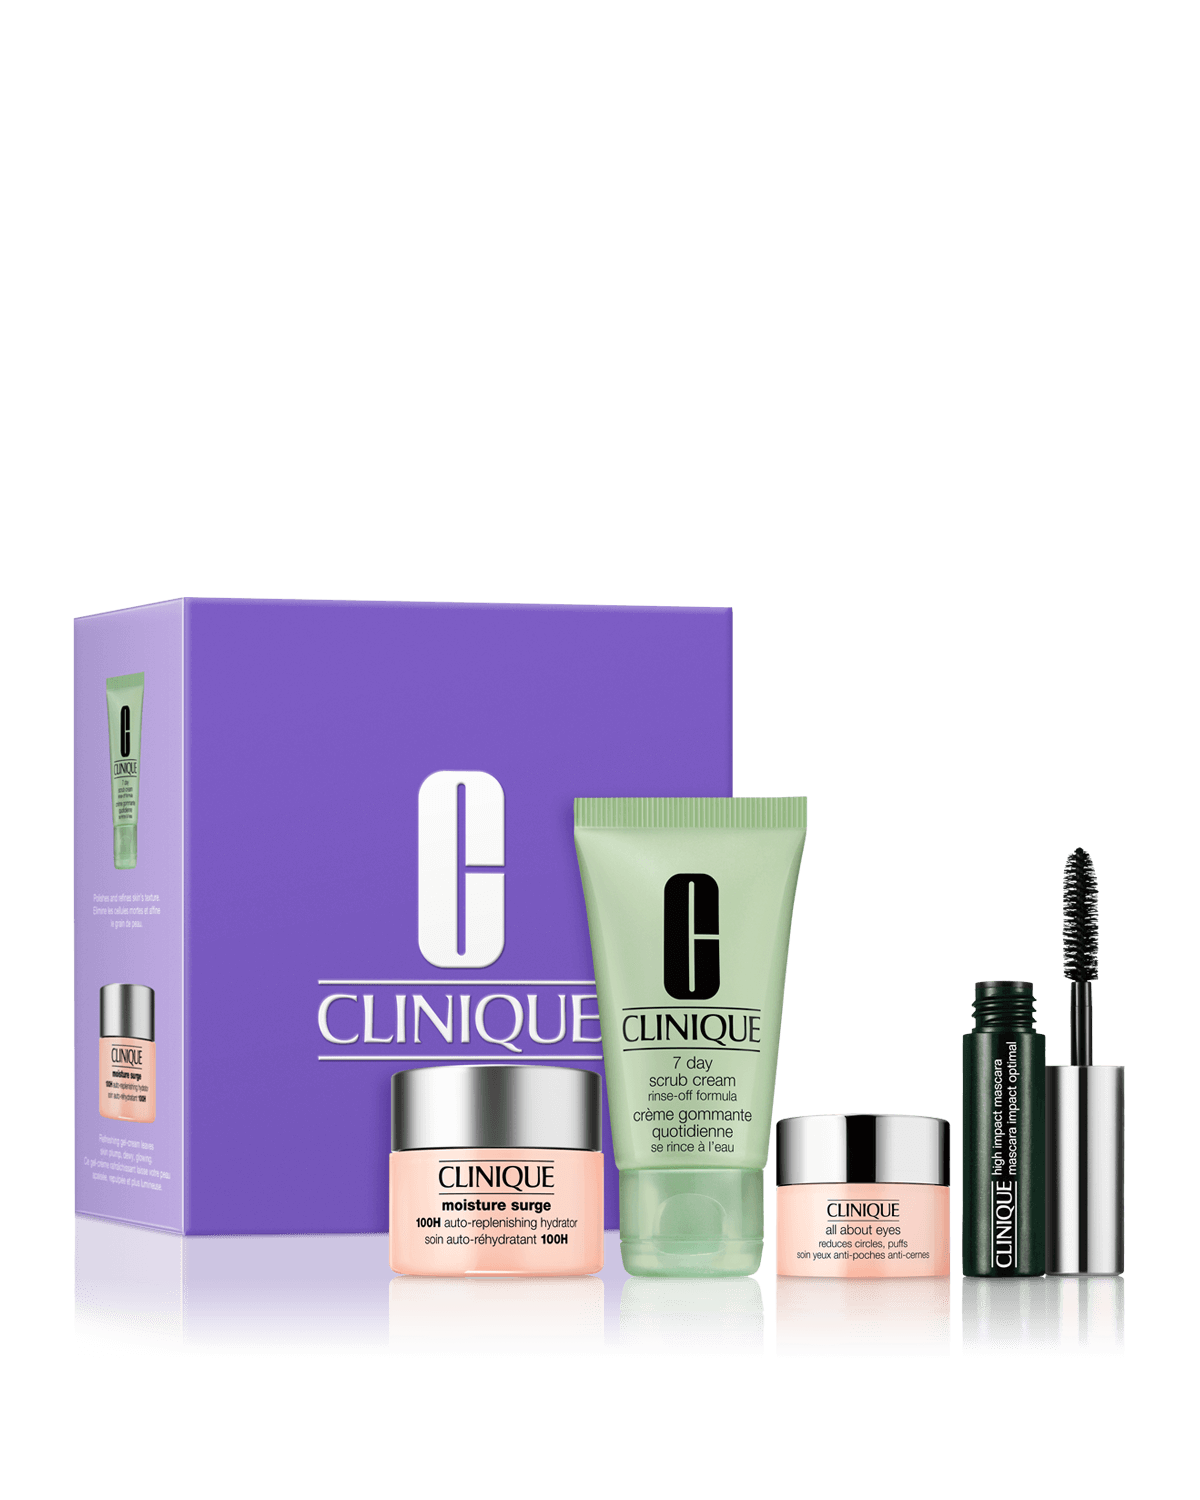 Top more than 112 clinique gift set sale latest